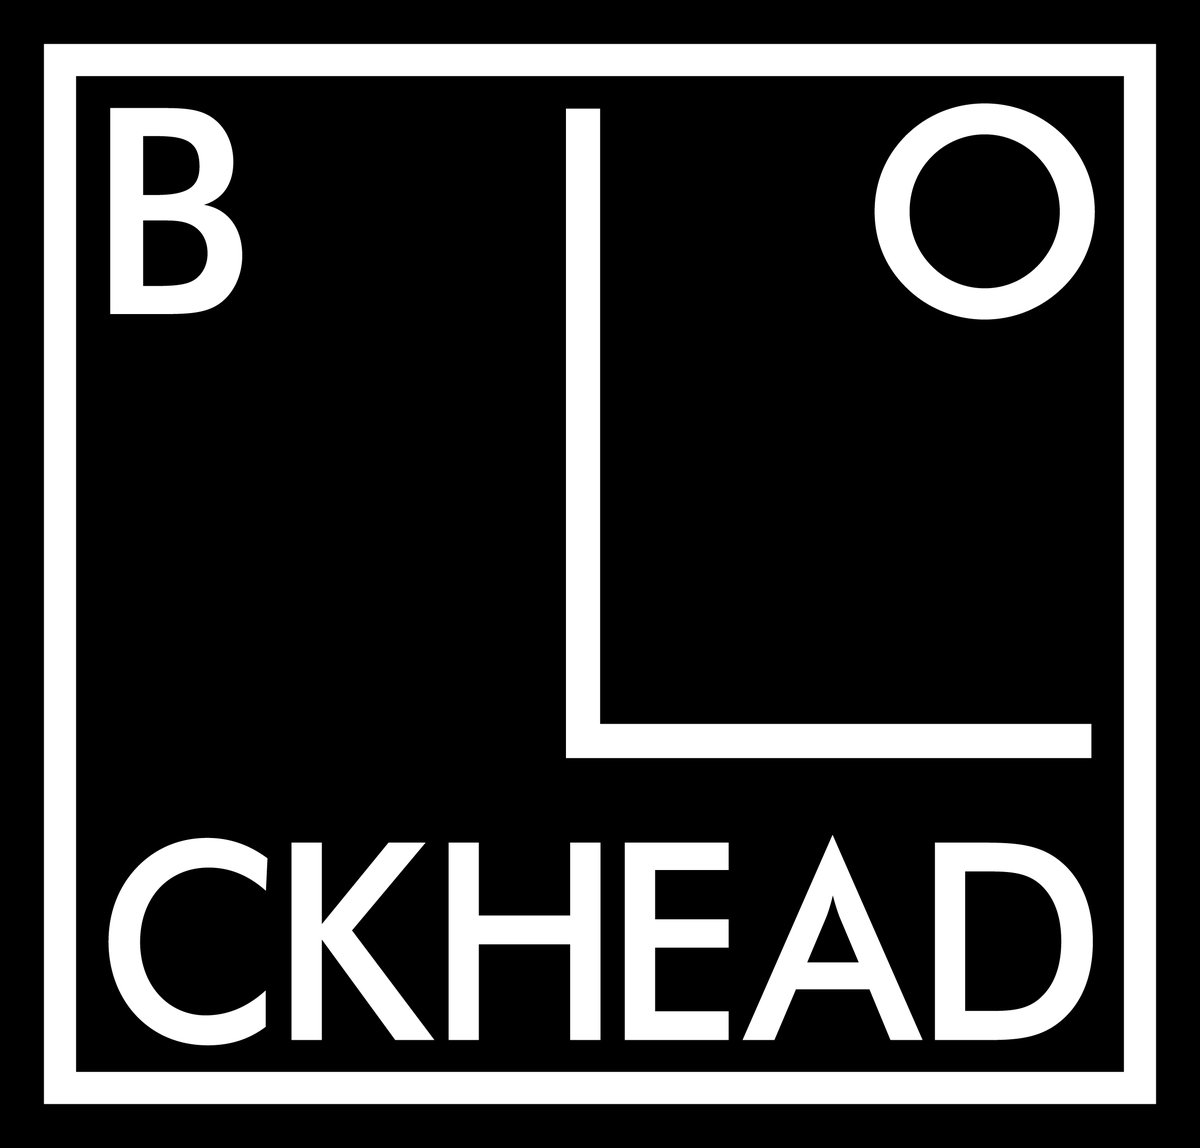 🚨ON SALE NOW🚨

Legendary outfit The Blockheads come to The Met in Jan 2025! 🔥

Starting out as the band behind Ian Dury, The Blockheads are still one of the most underrated British bands of all time 🙌

Tickets here
👉ow.ly/XzvS50RQATU